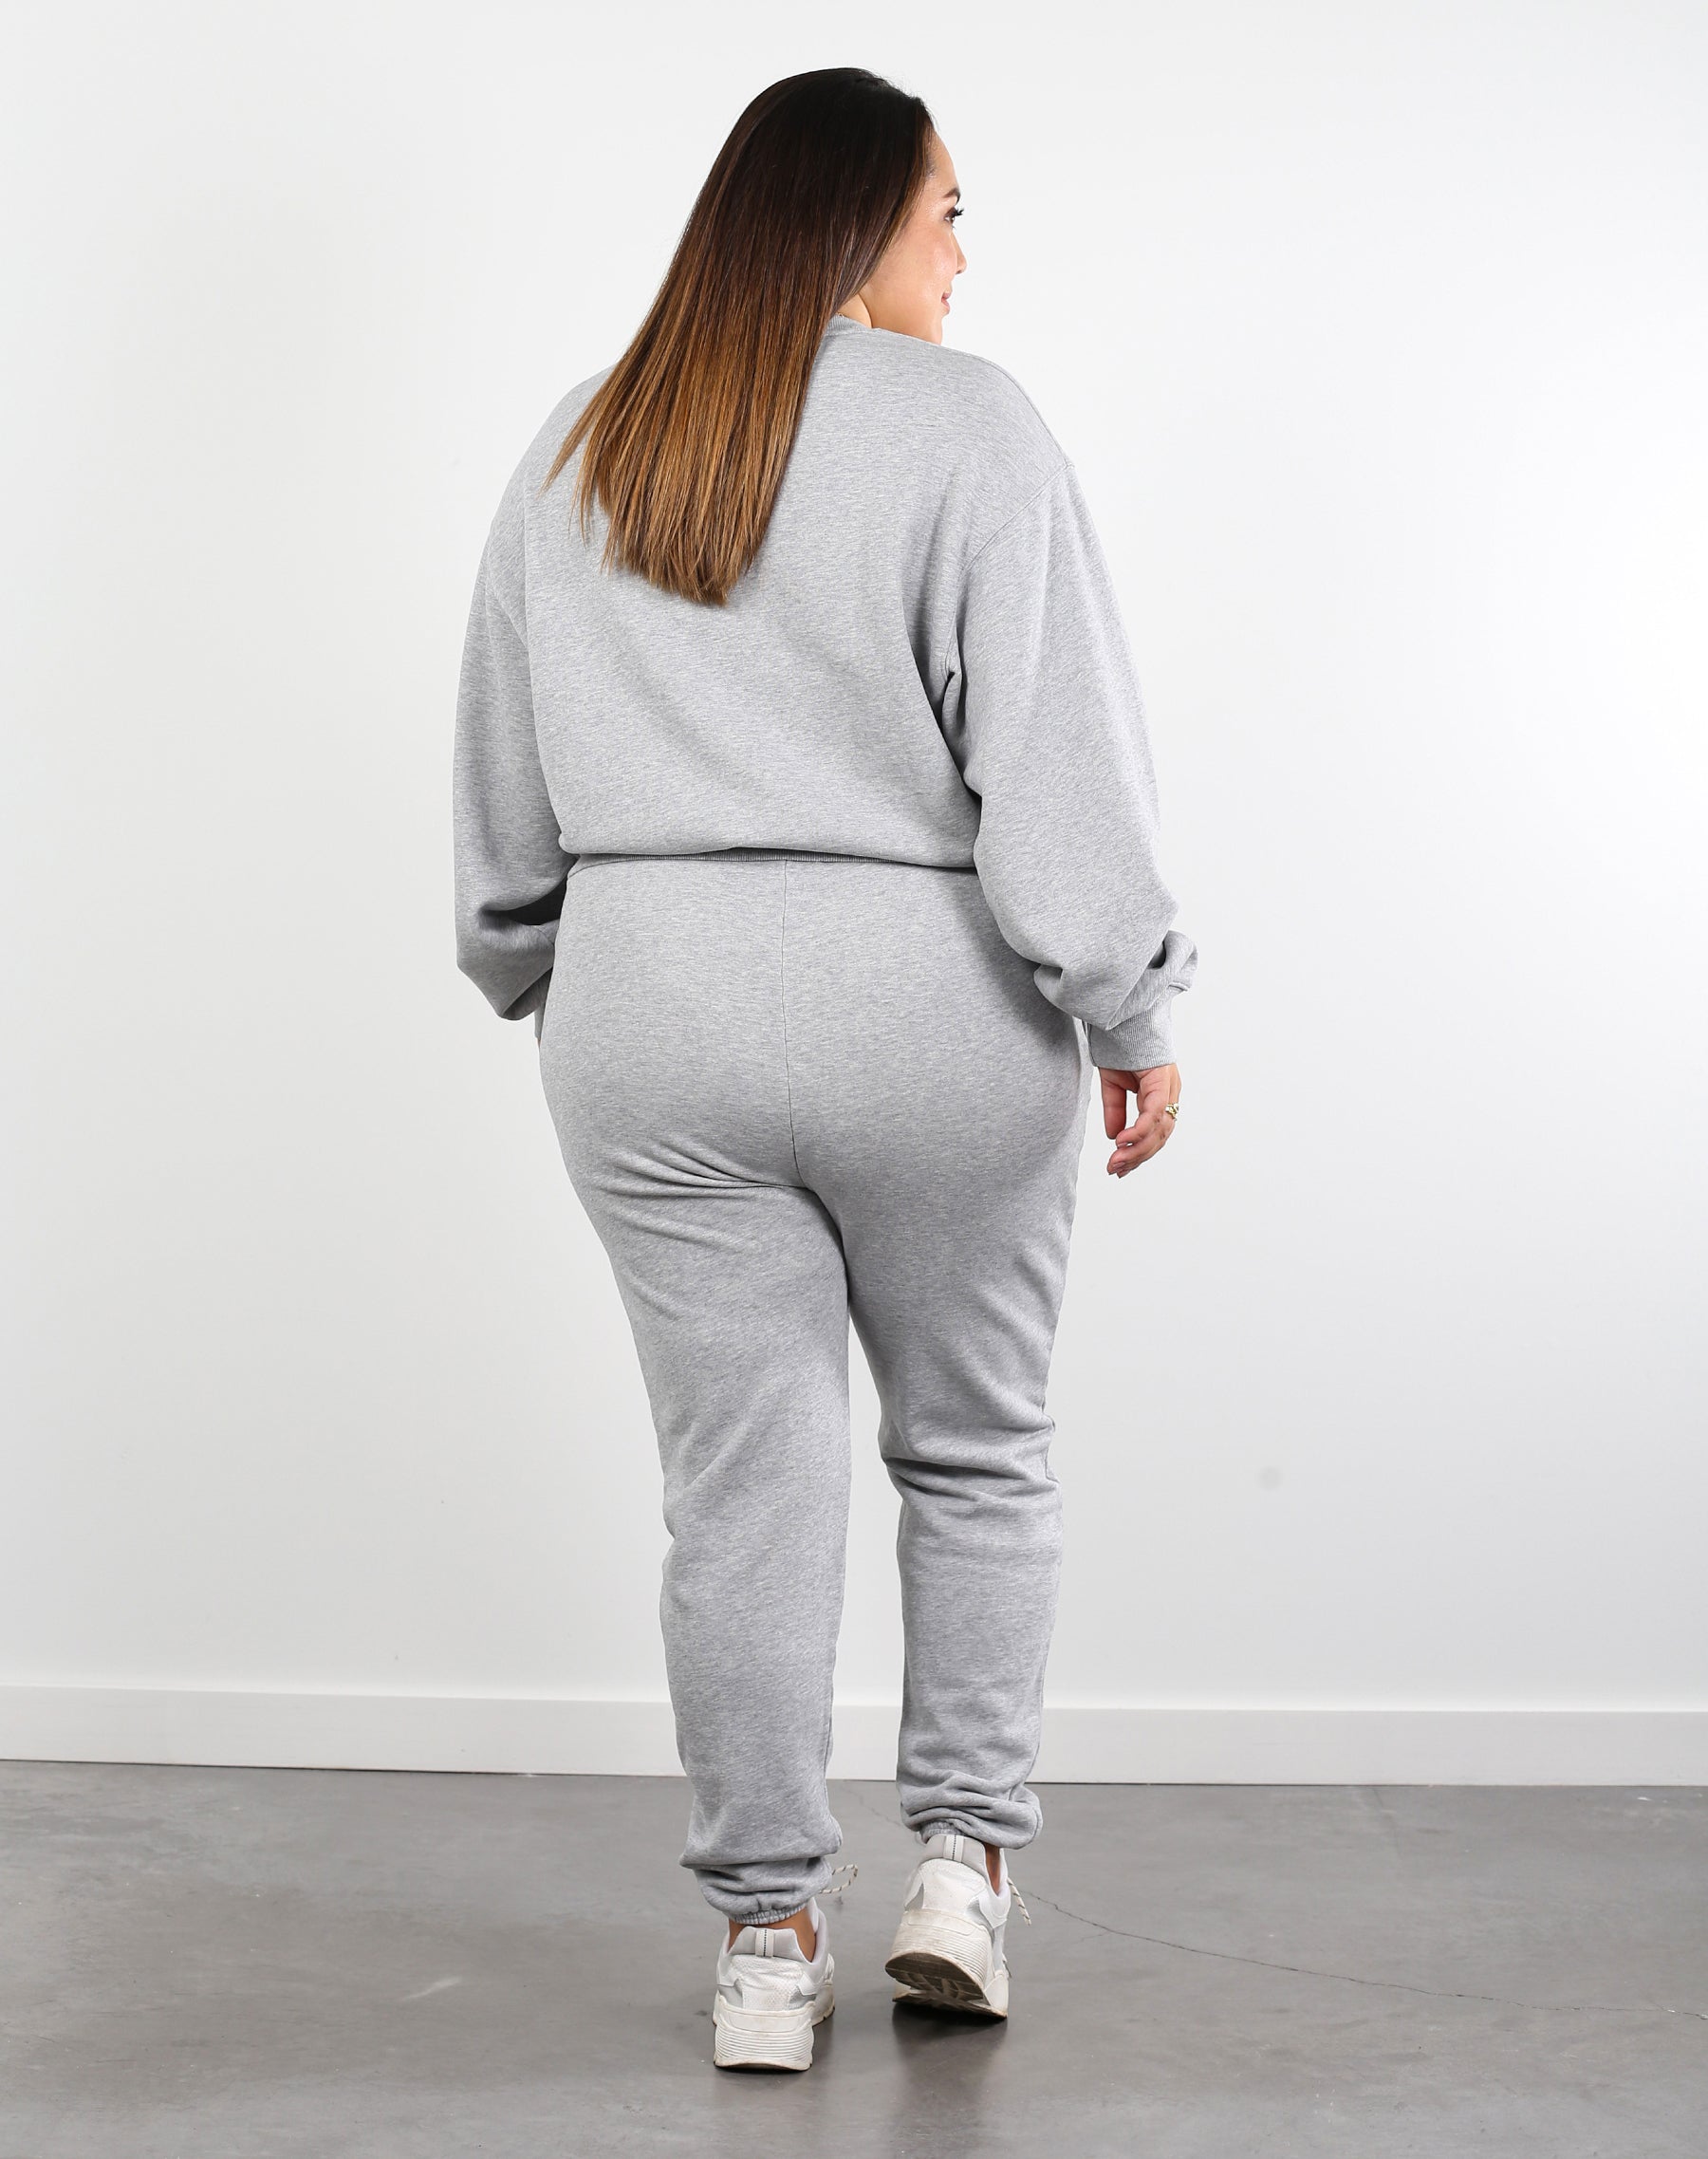 The Best Friend Jogger | Classic Grey